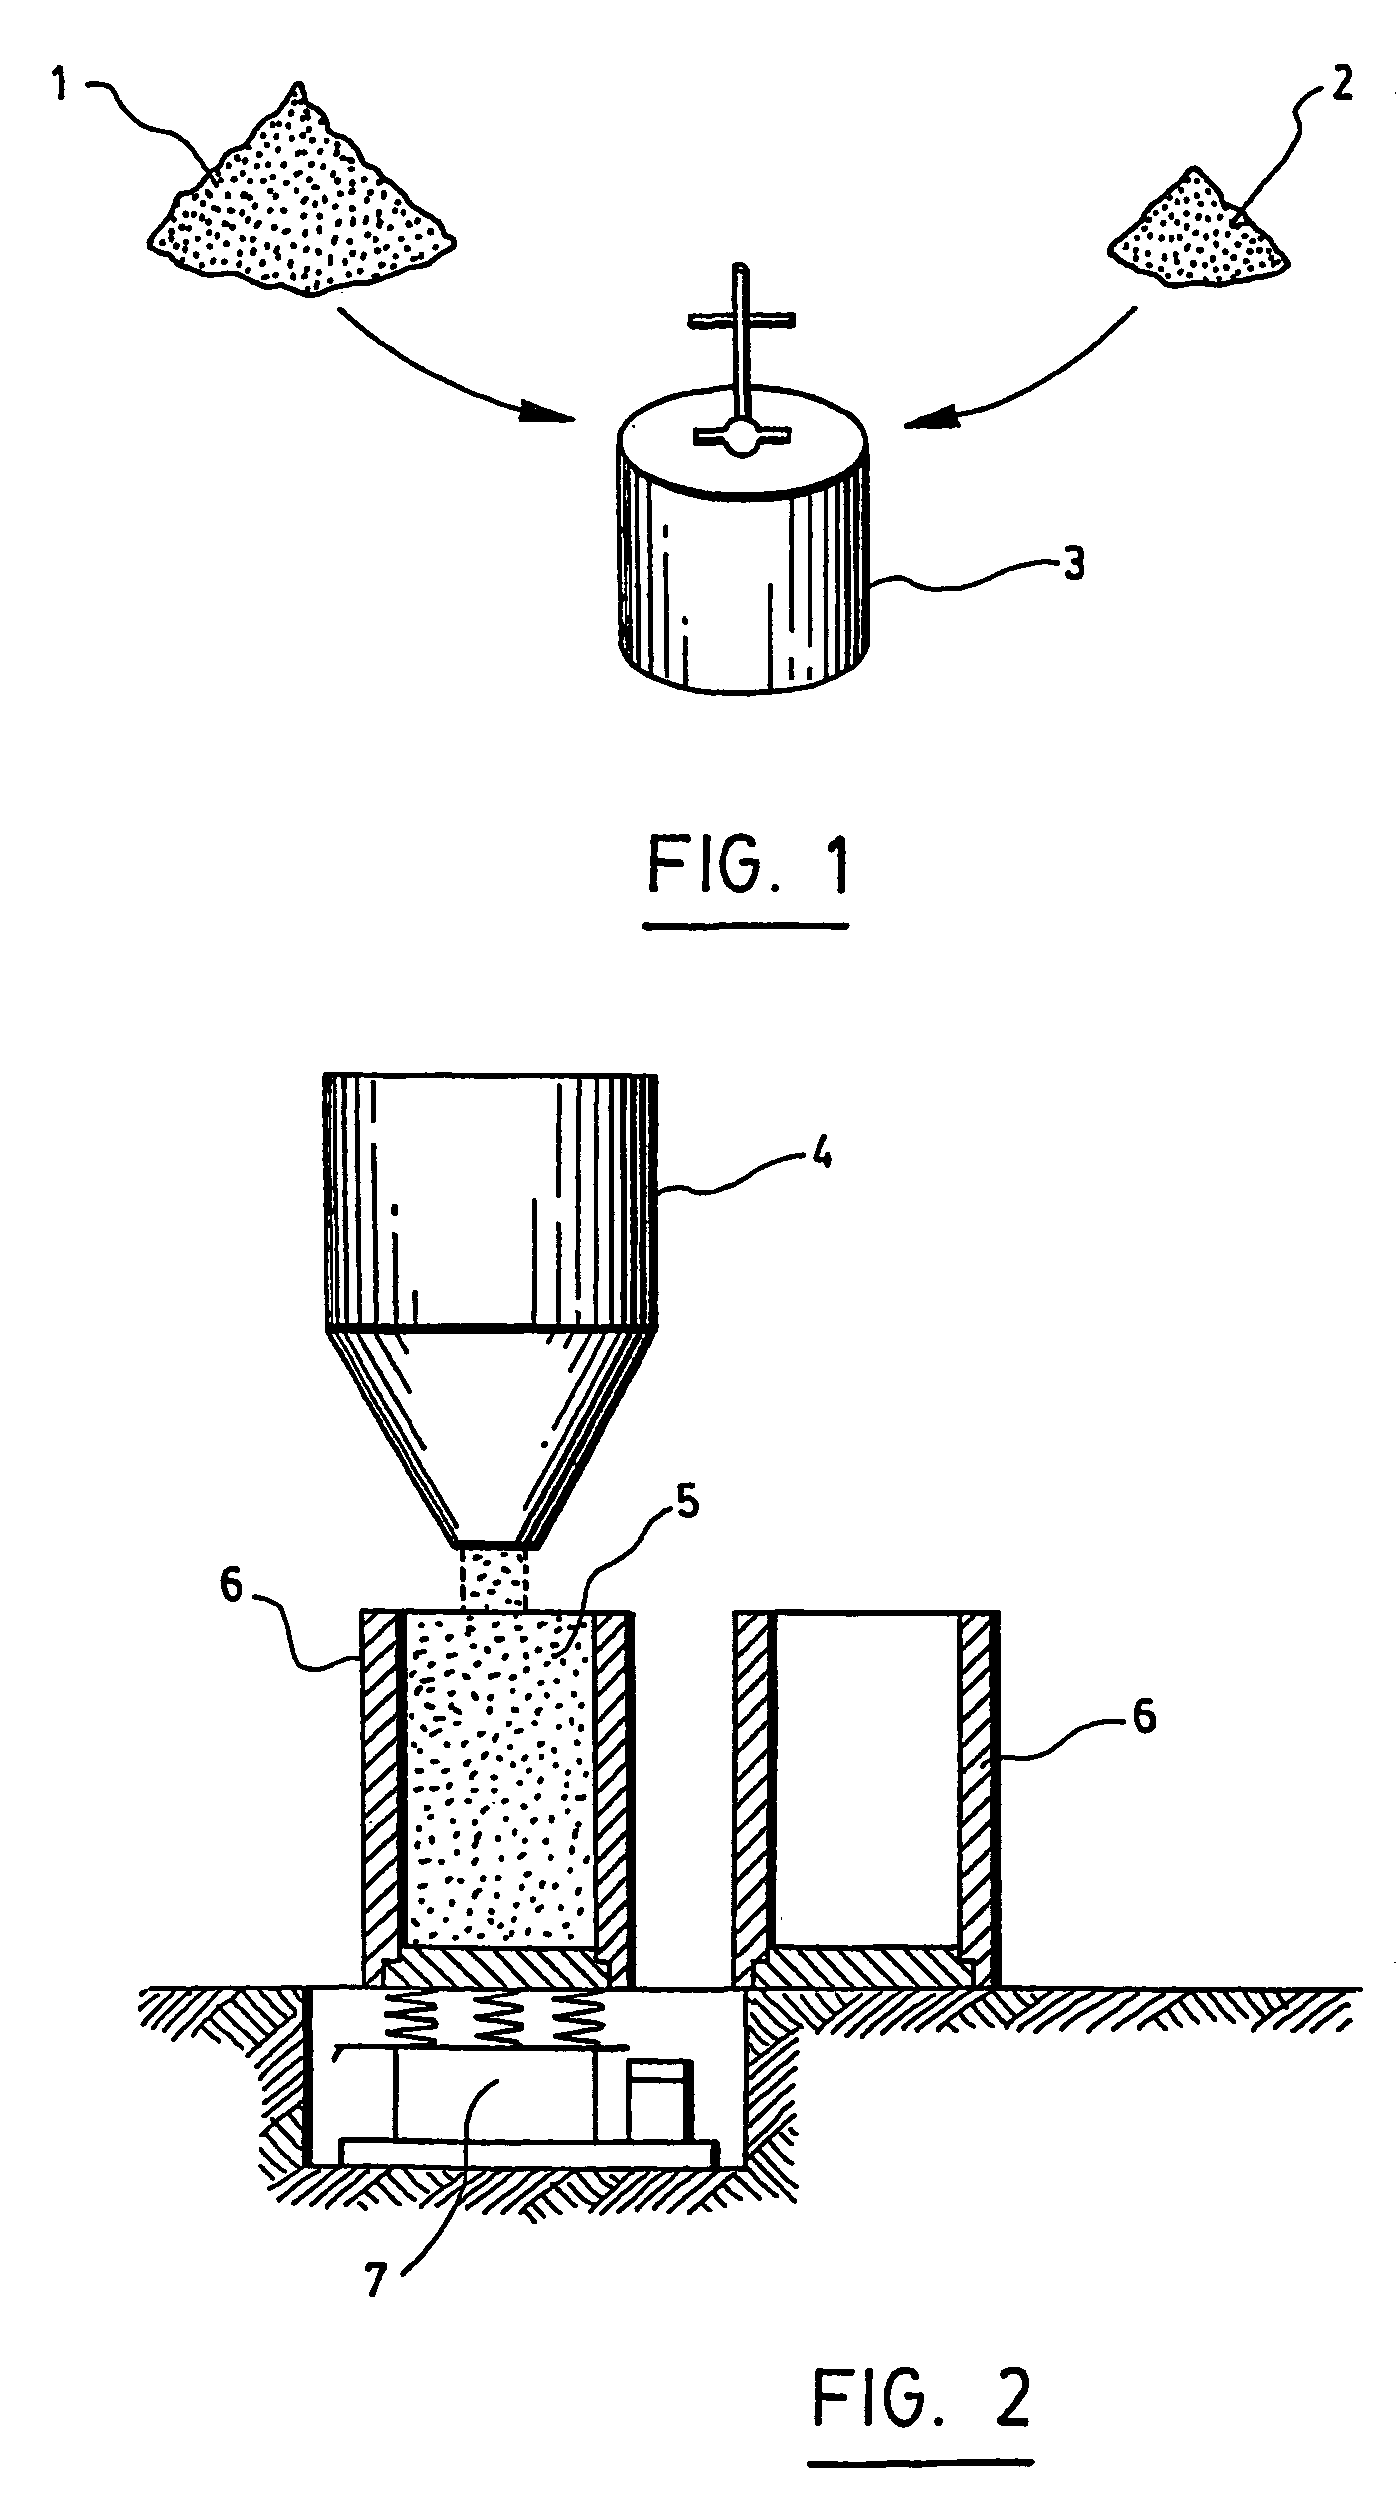 Method for production of metal foam or metal-composite bodies with improved impact, thermal and sound absorption properties